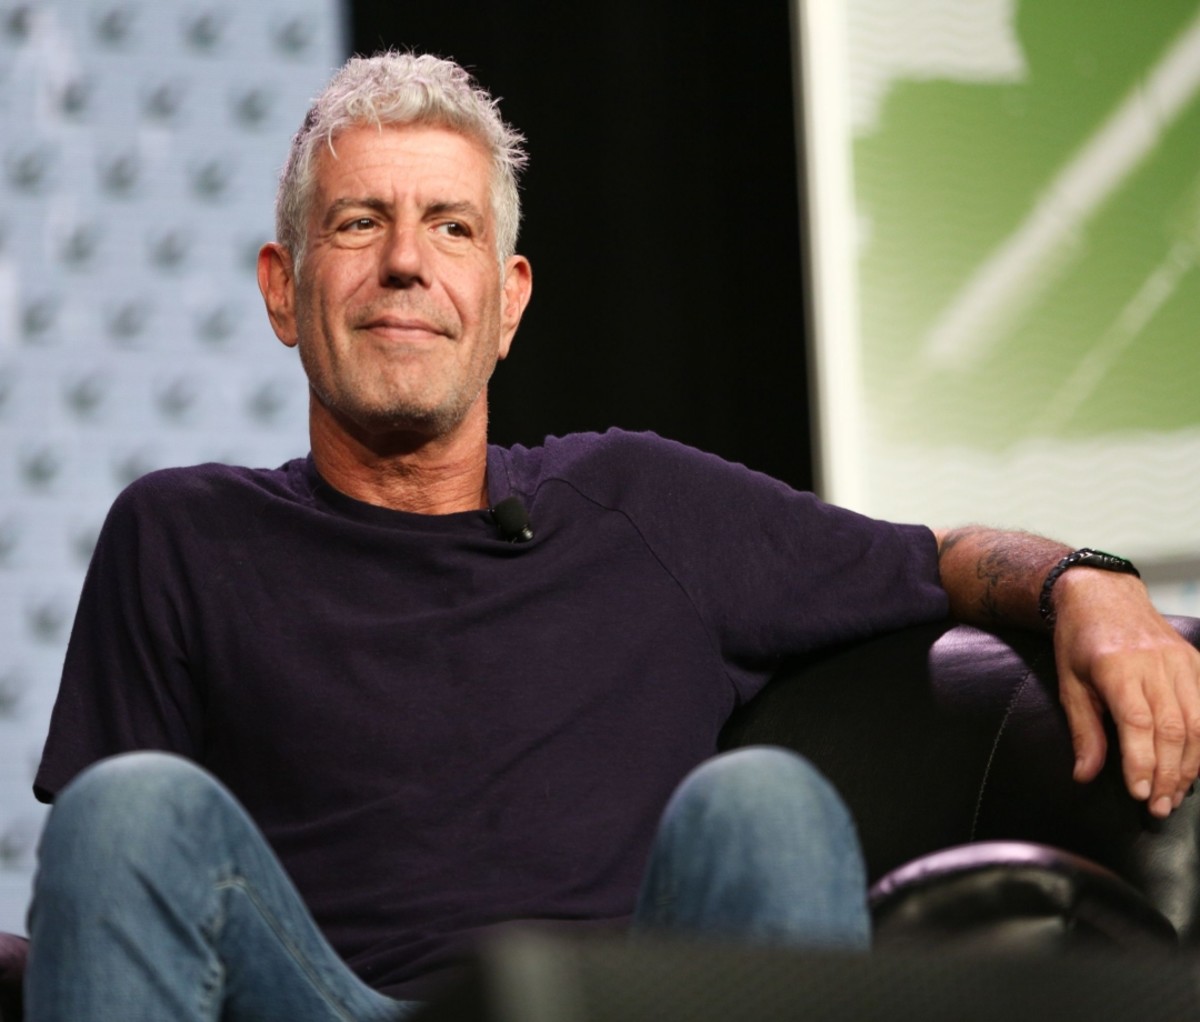 Anthony Bourdain sitting in a chair onstage